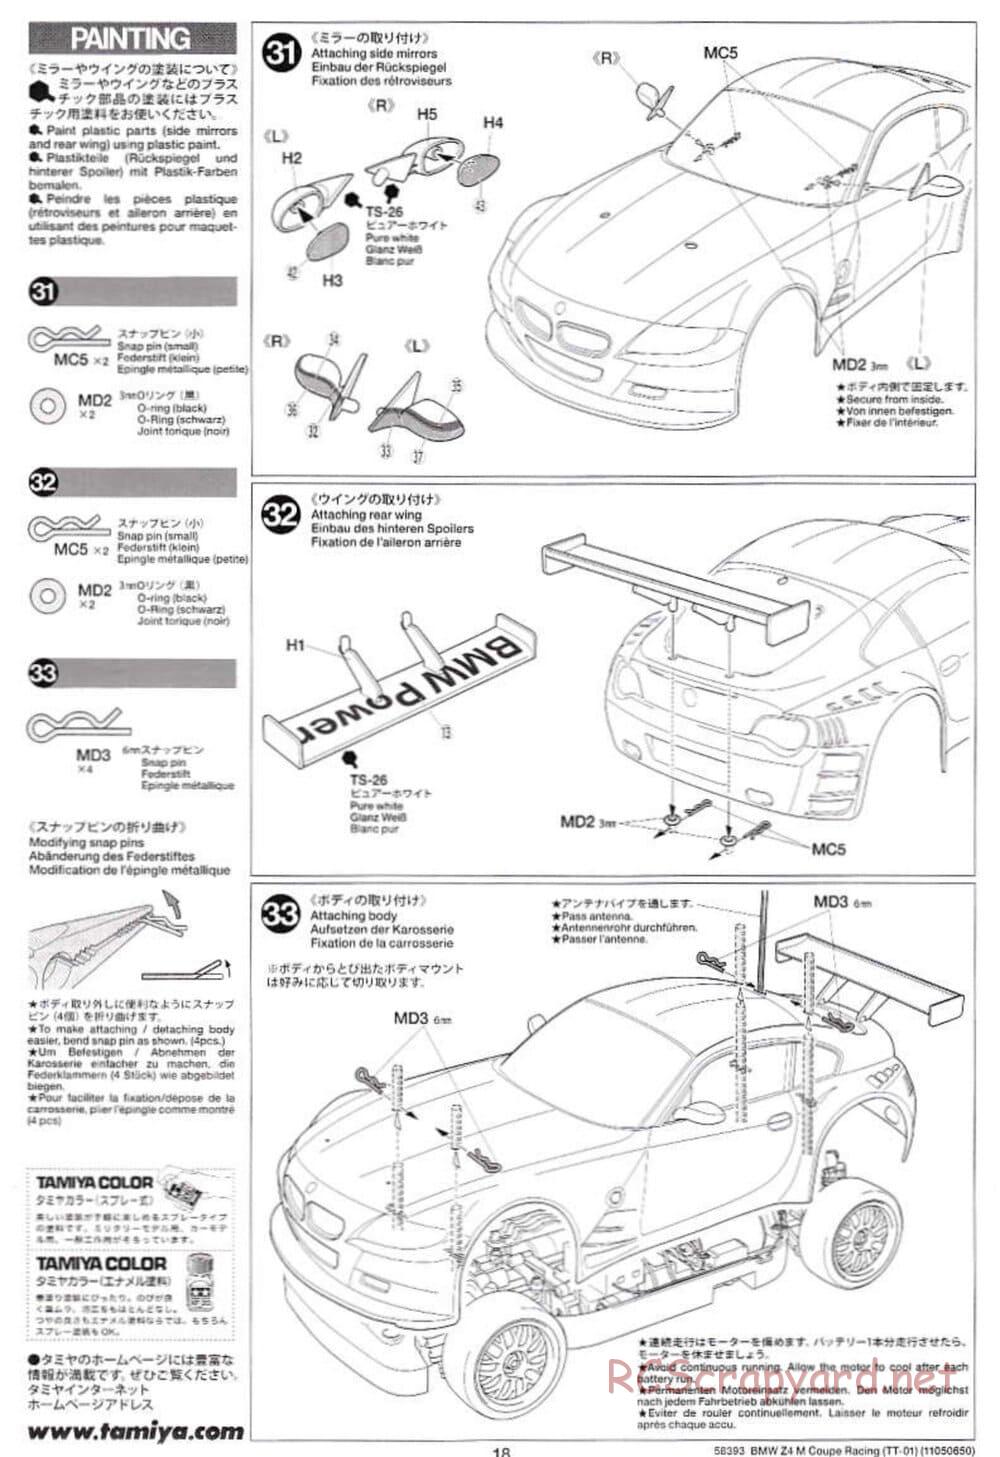 Tamiya - BMW Z4 M Coupe Racing - TT-01 Chassis - Manual - Page 18